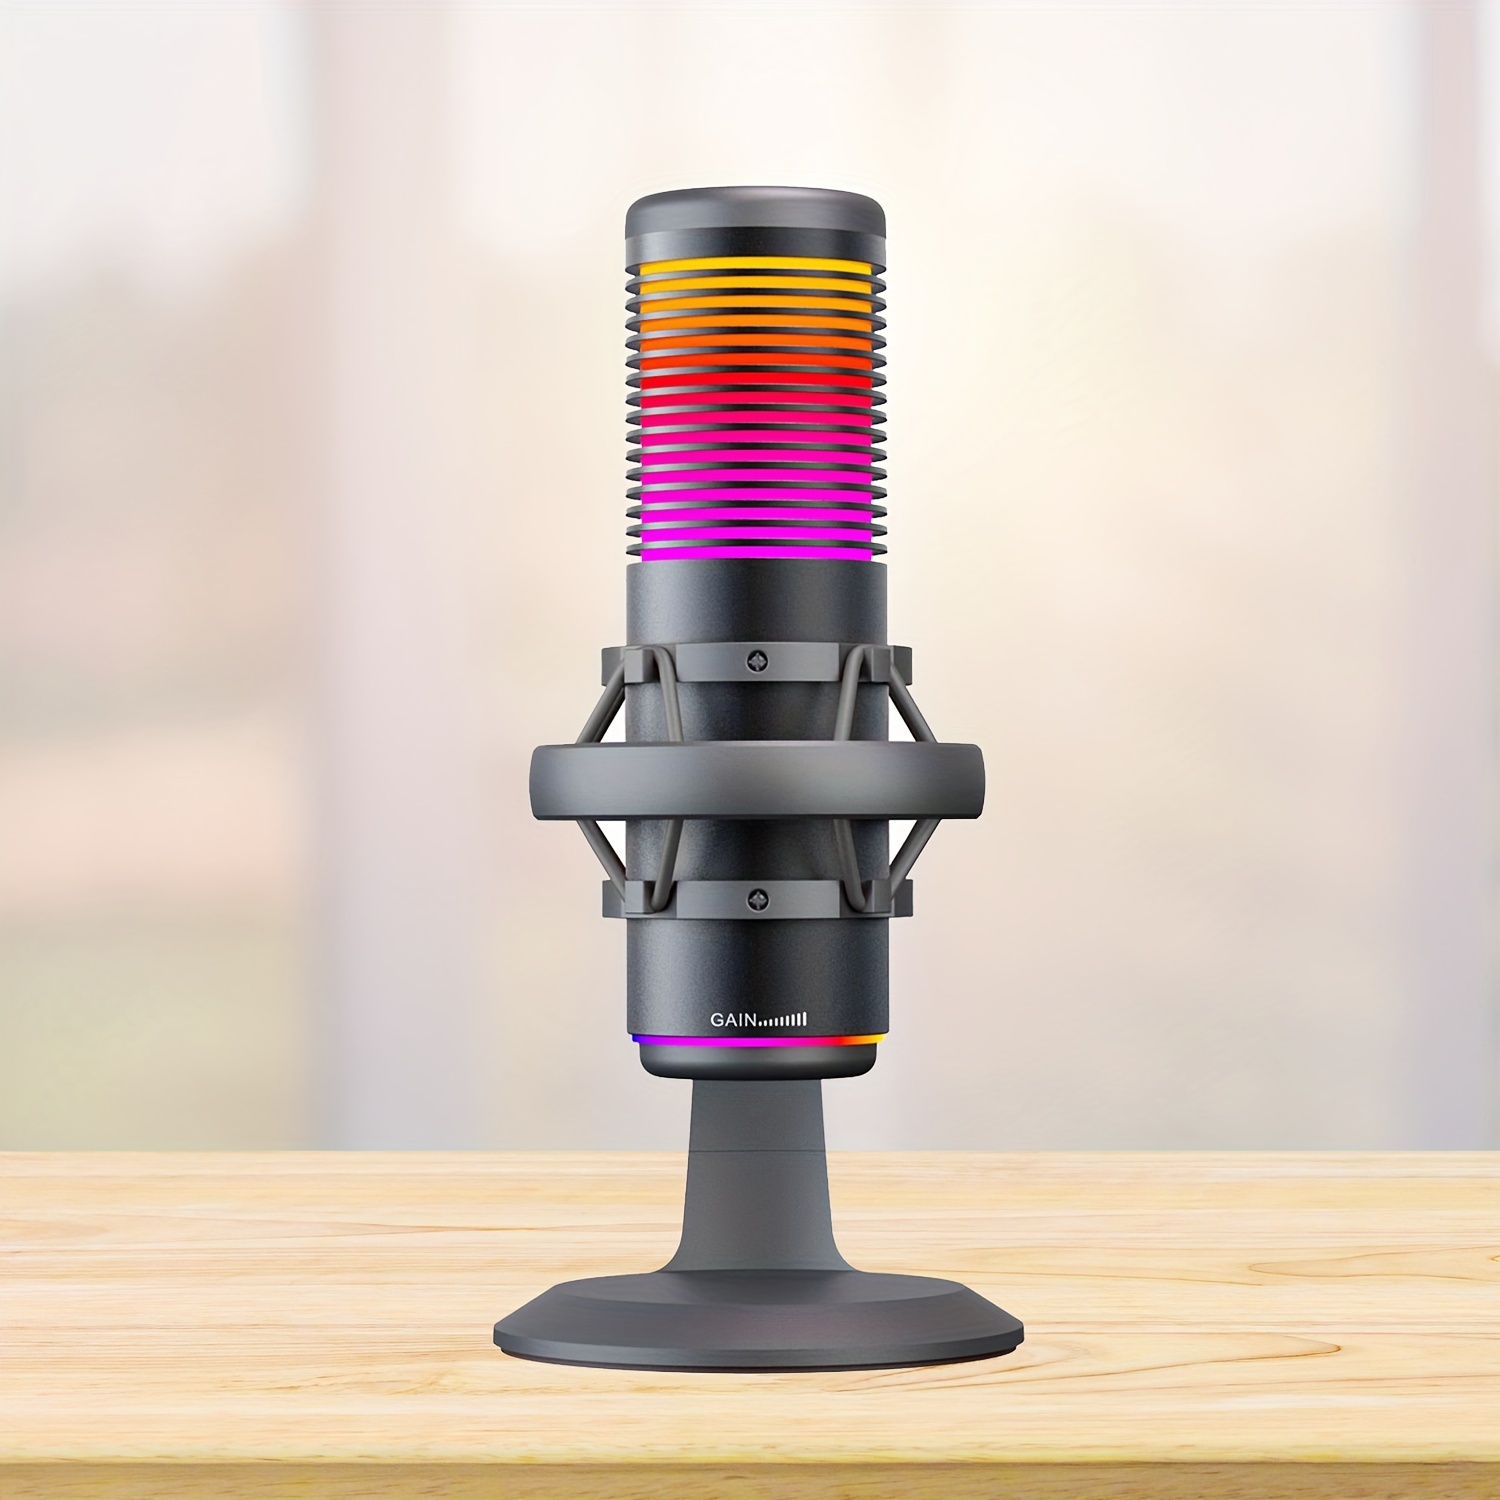 

Usb Condenser Gaming Microphone With Shock Mount, Gain Control, Rgb Microphone For Gaming, Streaming, Podcasting